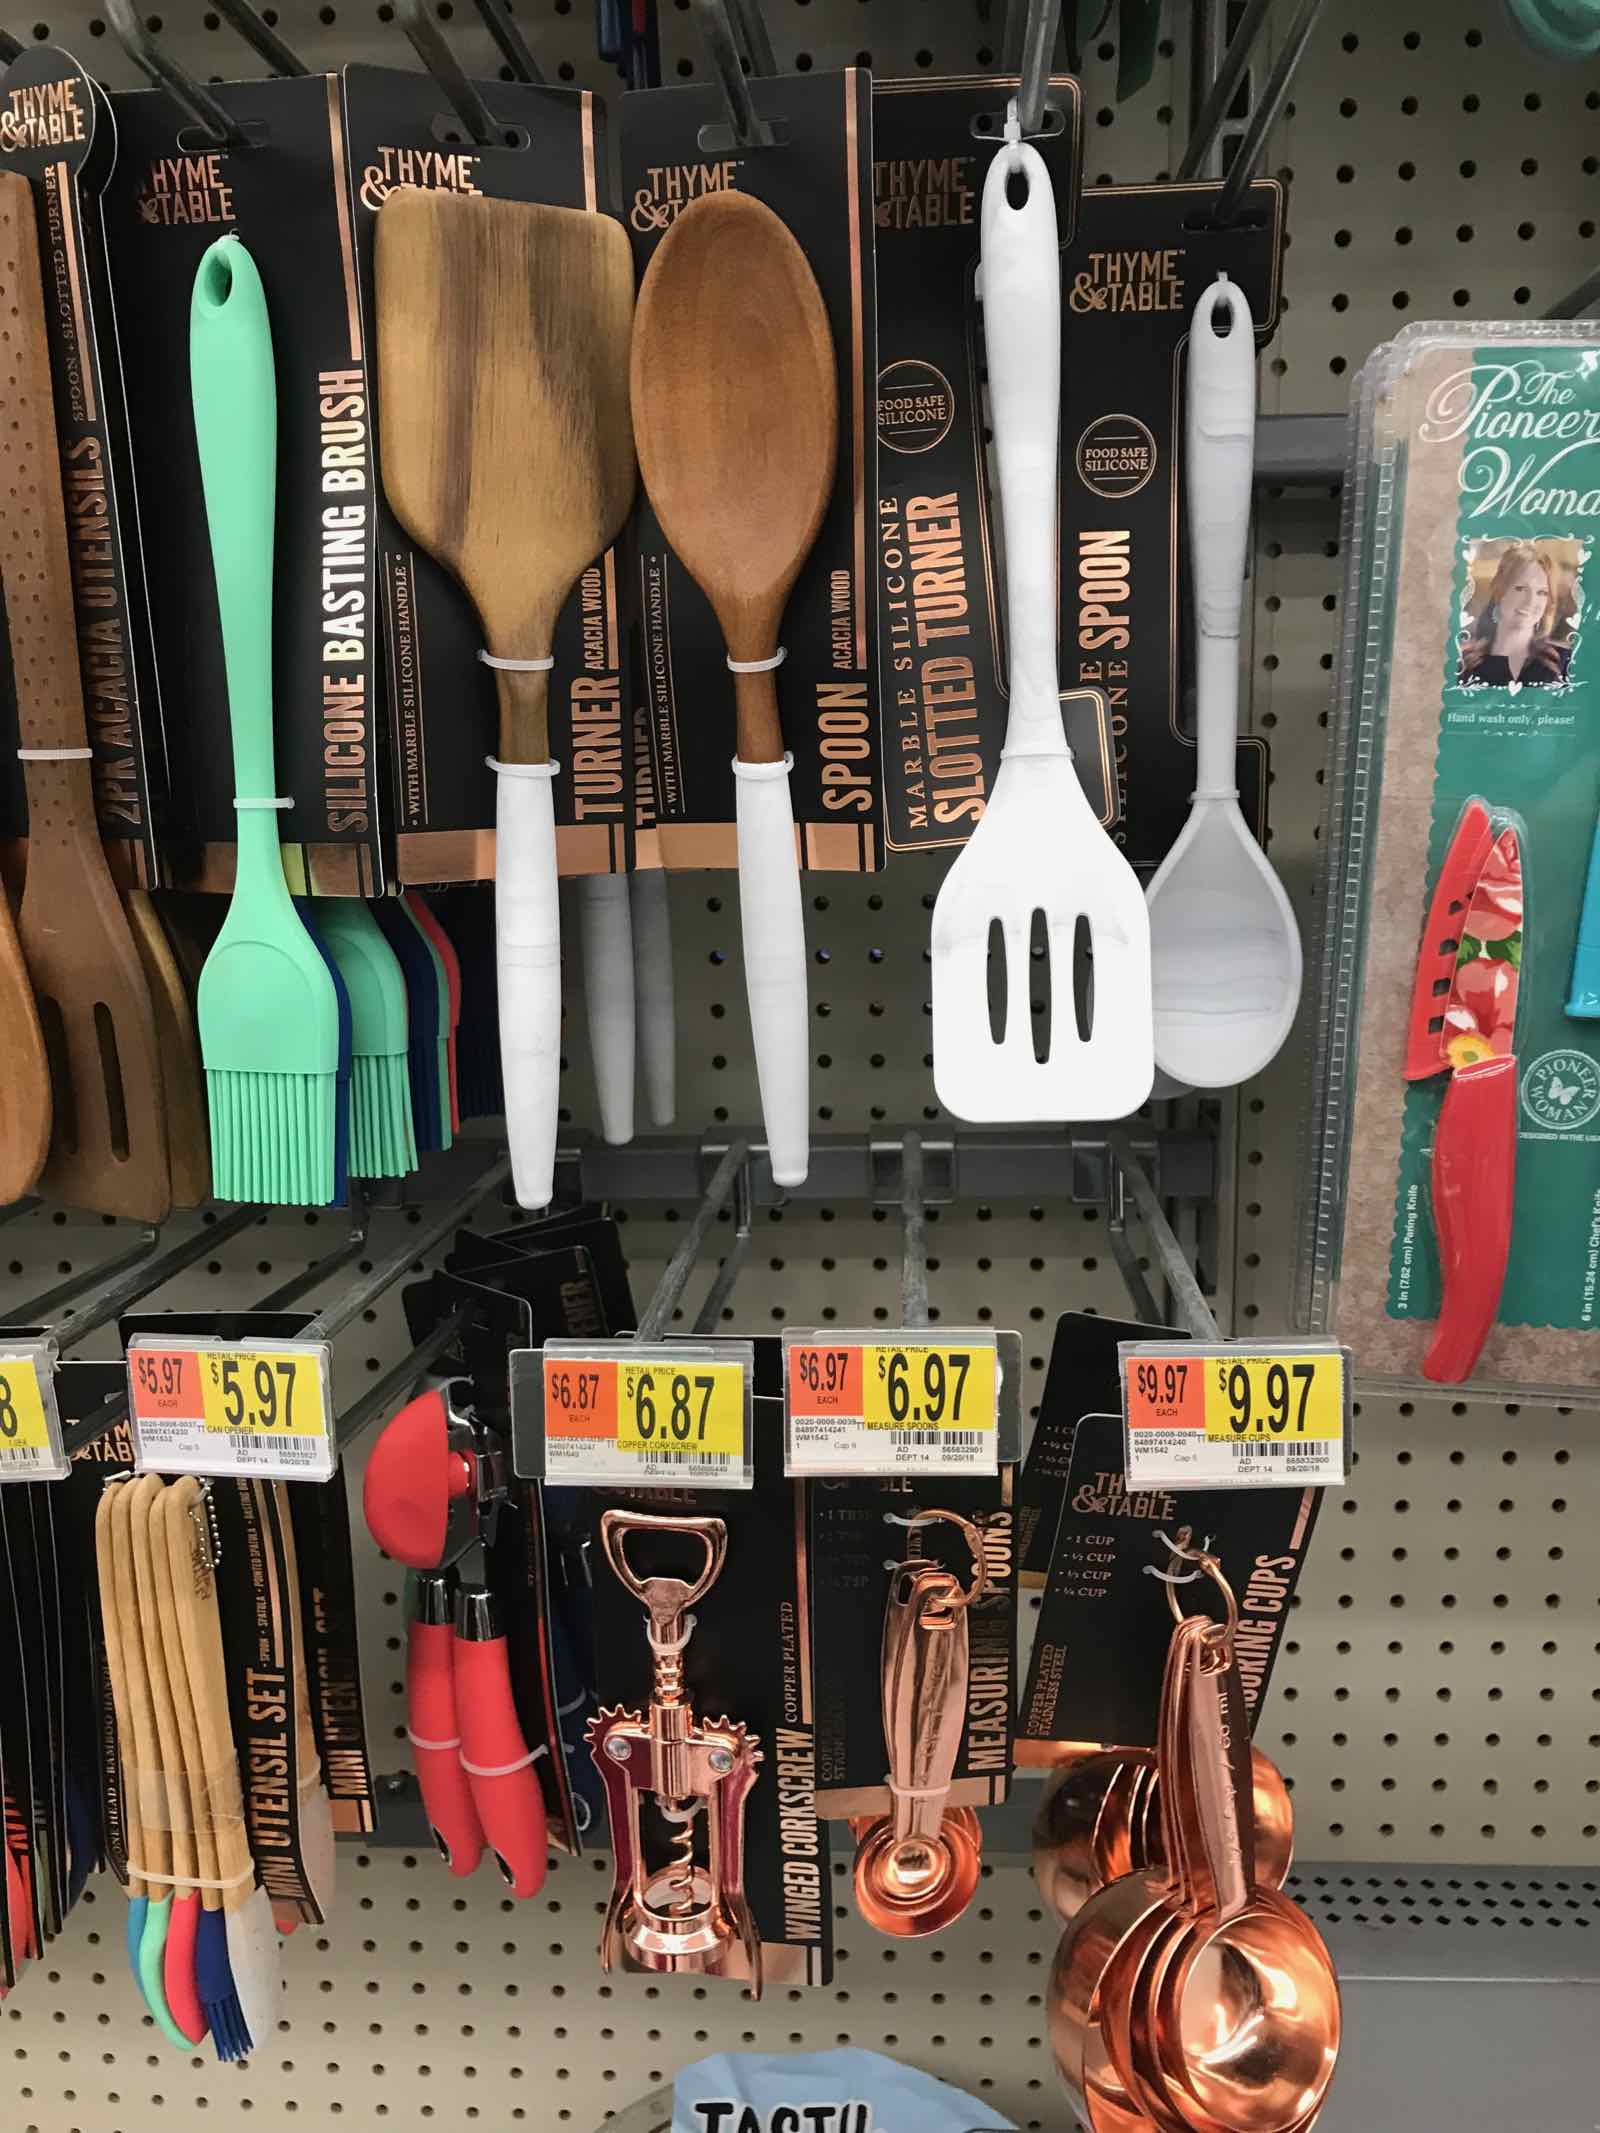 Walmart Apopka - Check out our other line called Thyme and Table. Bold  colors and copper!! You can have fancy utensils at a great price!!!!